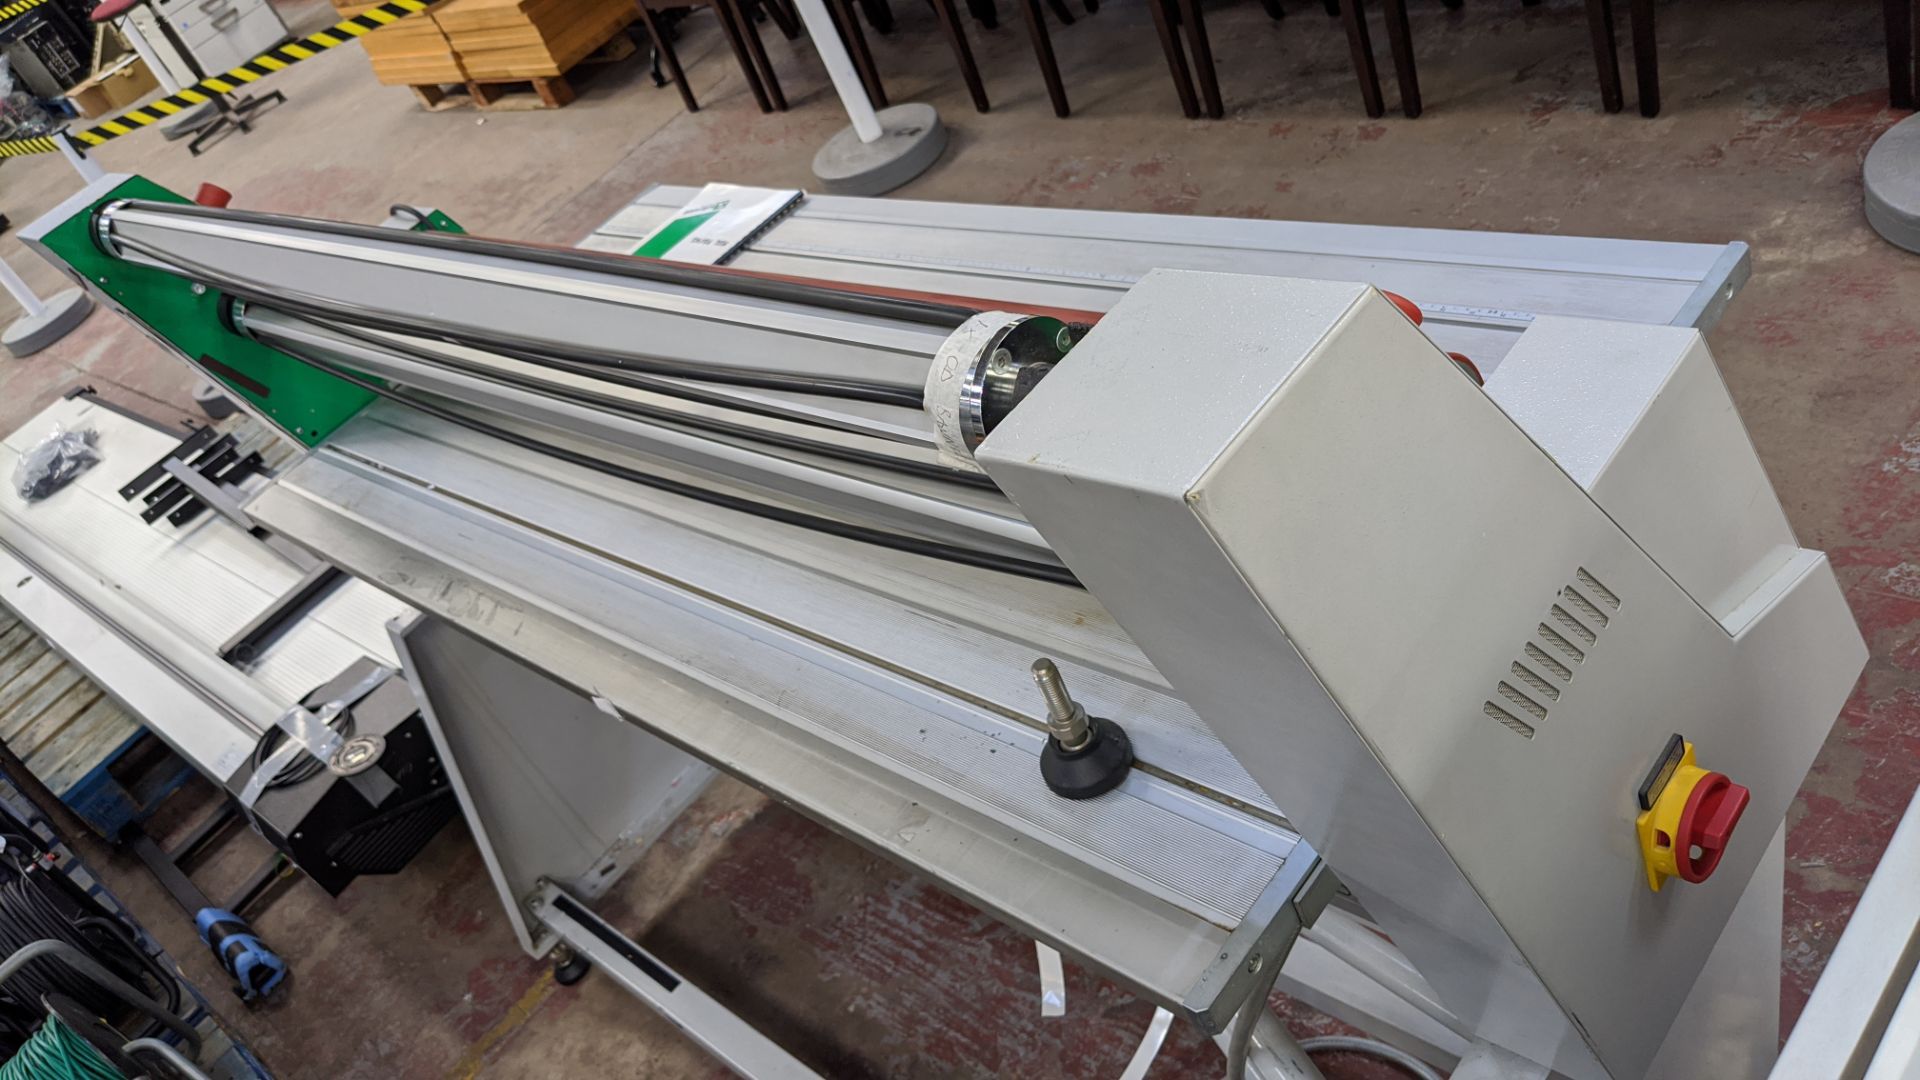 Sallmetall Multi-System laminator Lots 51 - 480 comprise the total assets of Mills Media Ltd in - Image 7 of 8